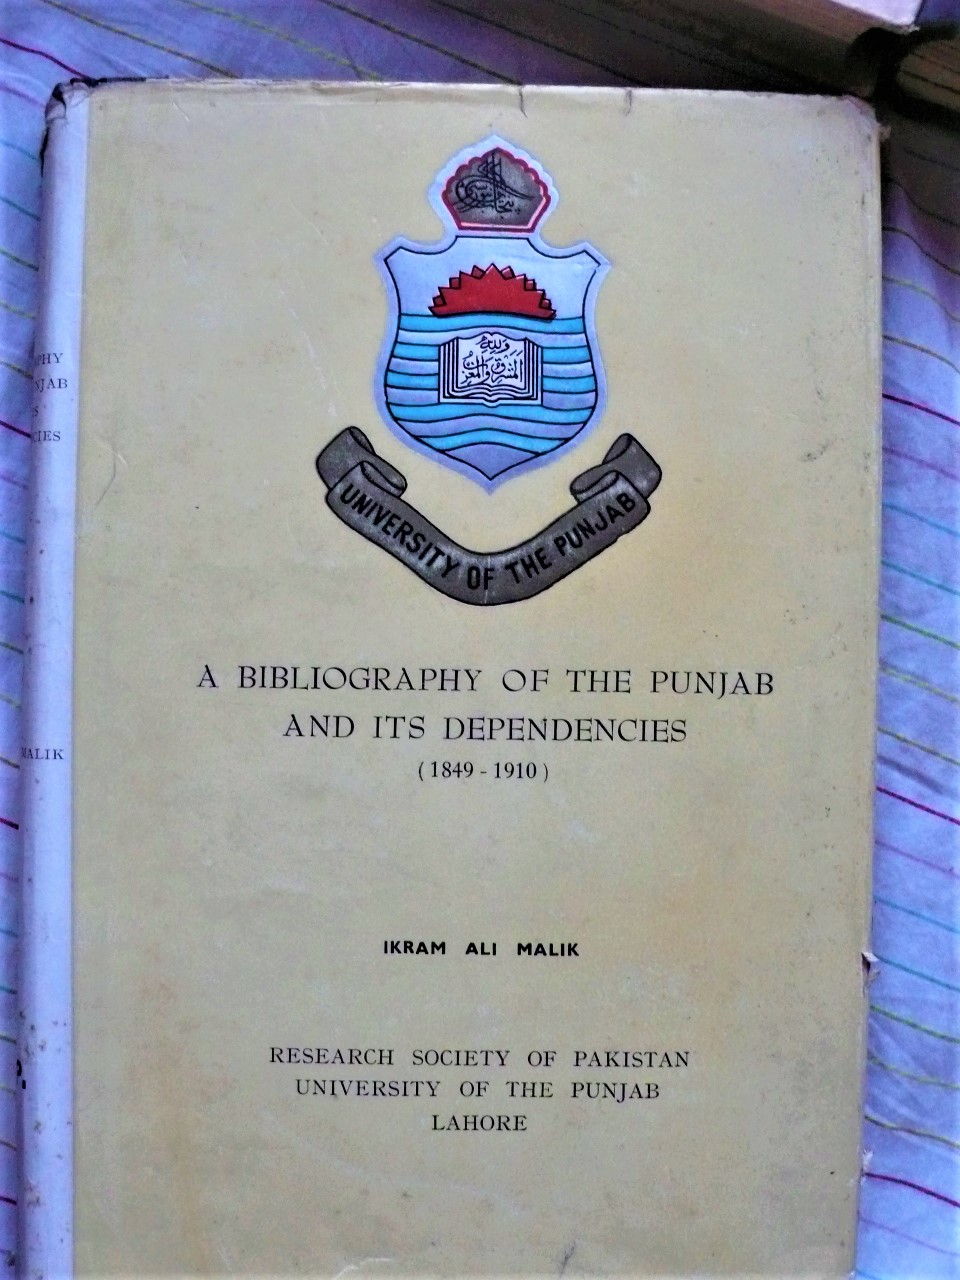 a bibliography of the punjab and its dependencies- 1849-1910